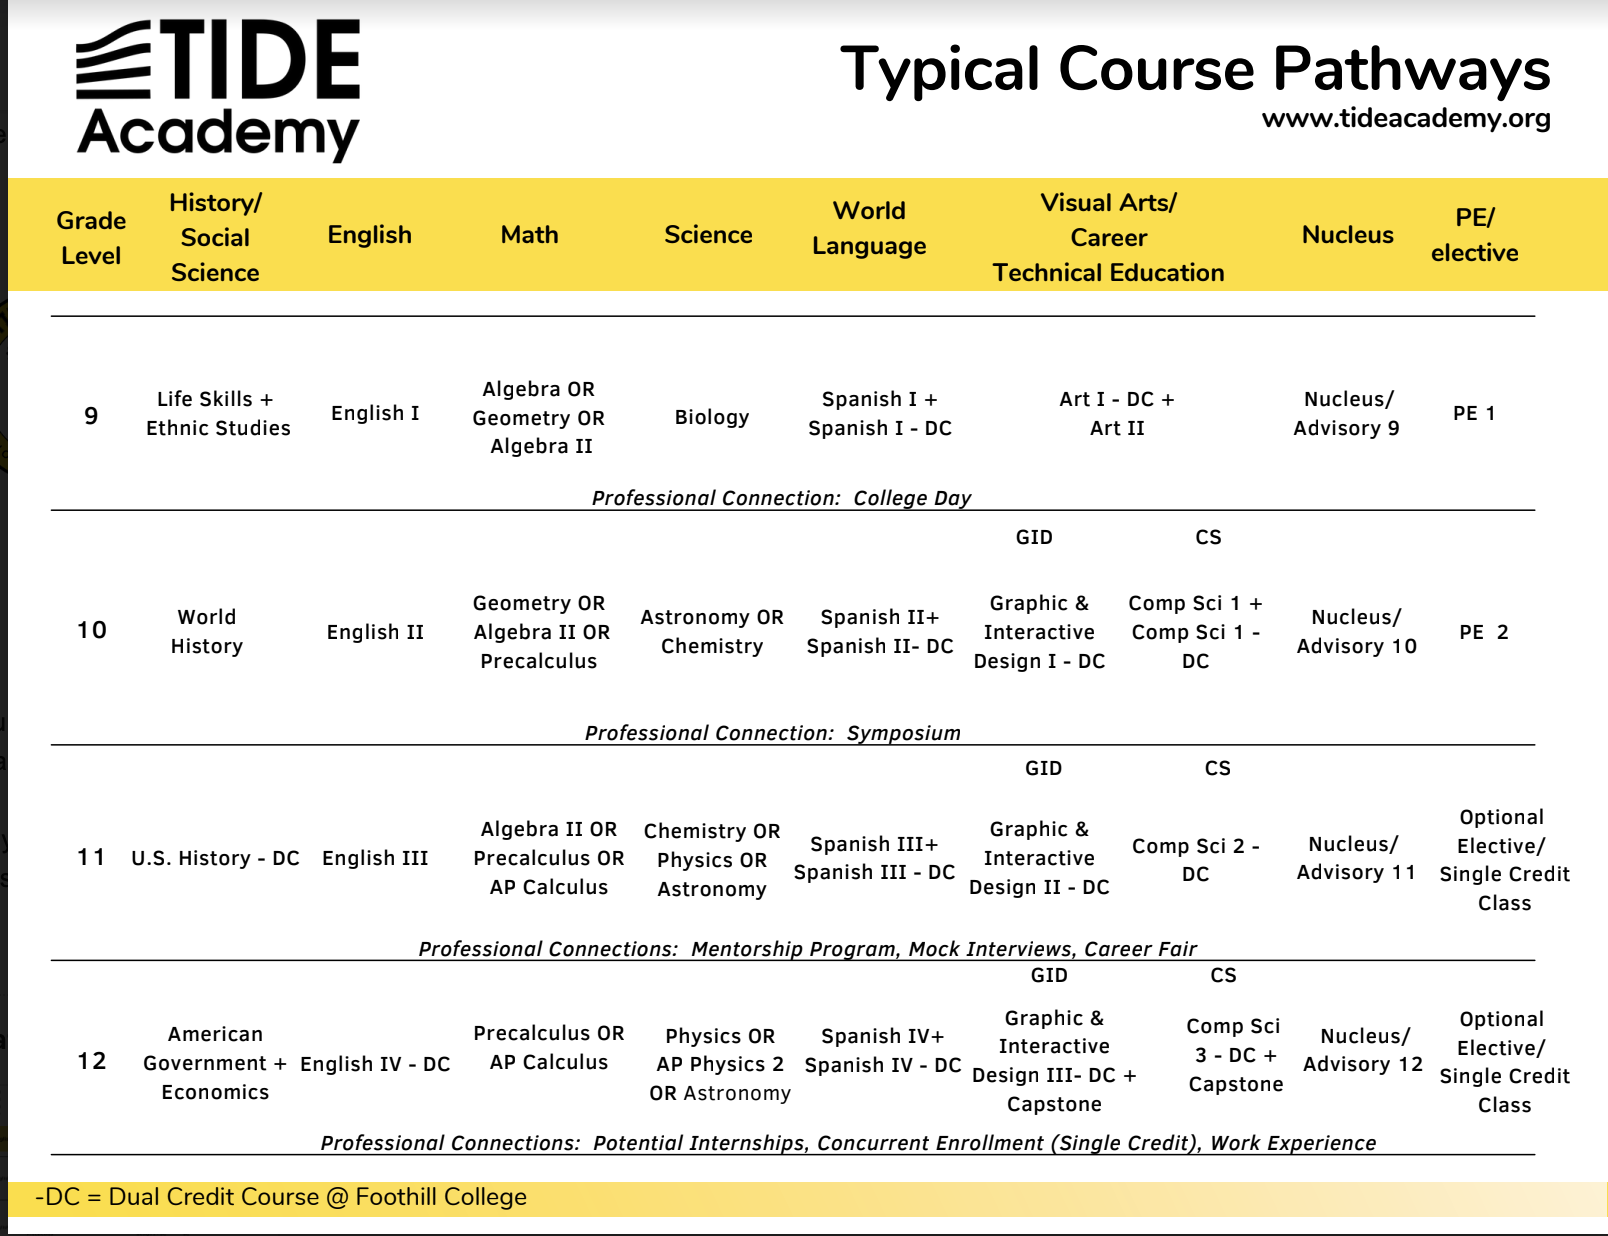 Typical Course Pathways